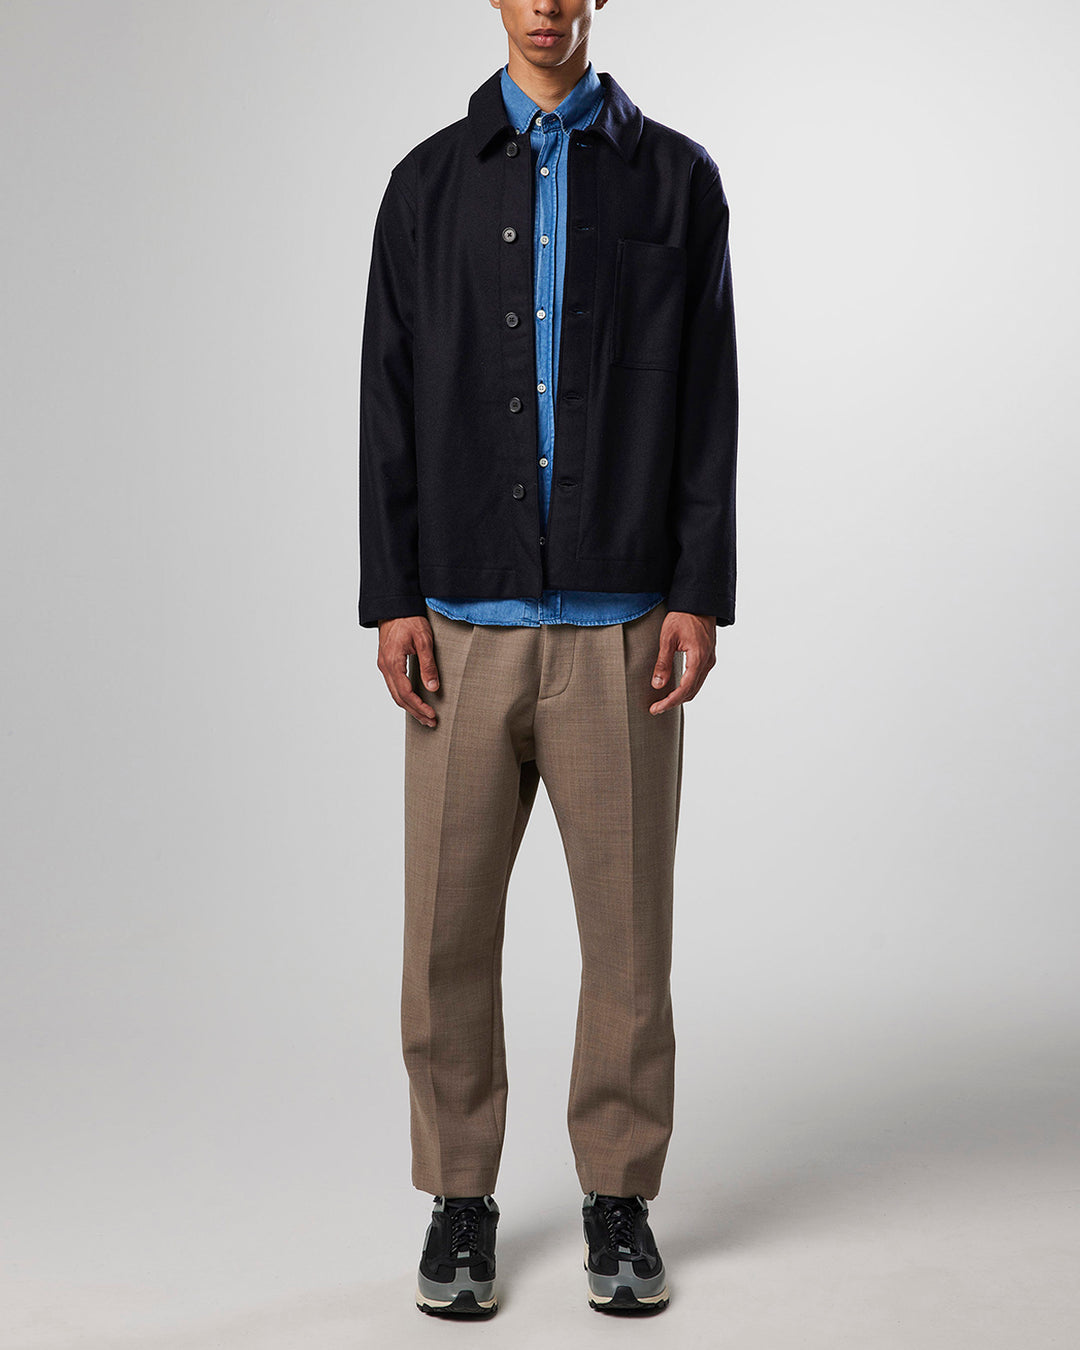 NN07 - Cruise 1698 Hybrid Jacket in Navy Blue | Buster McGee